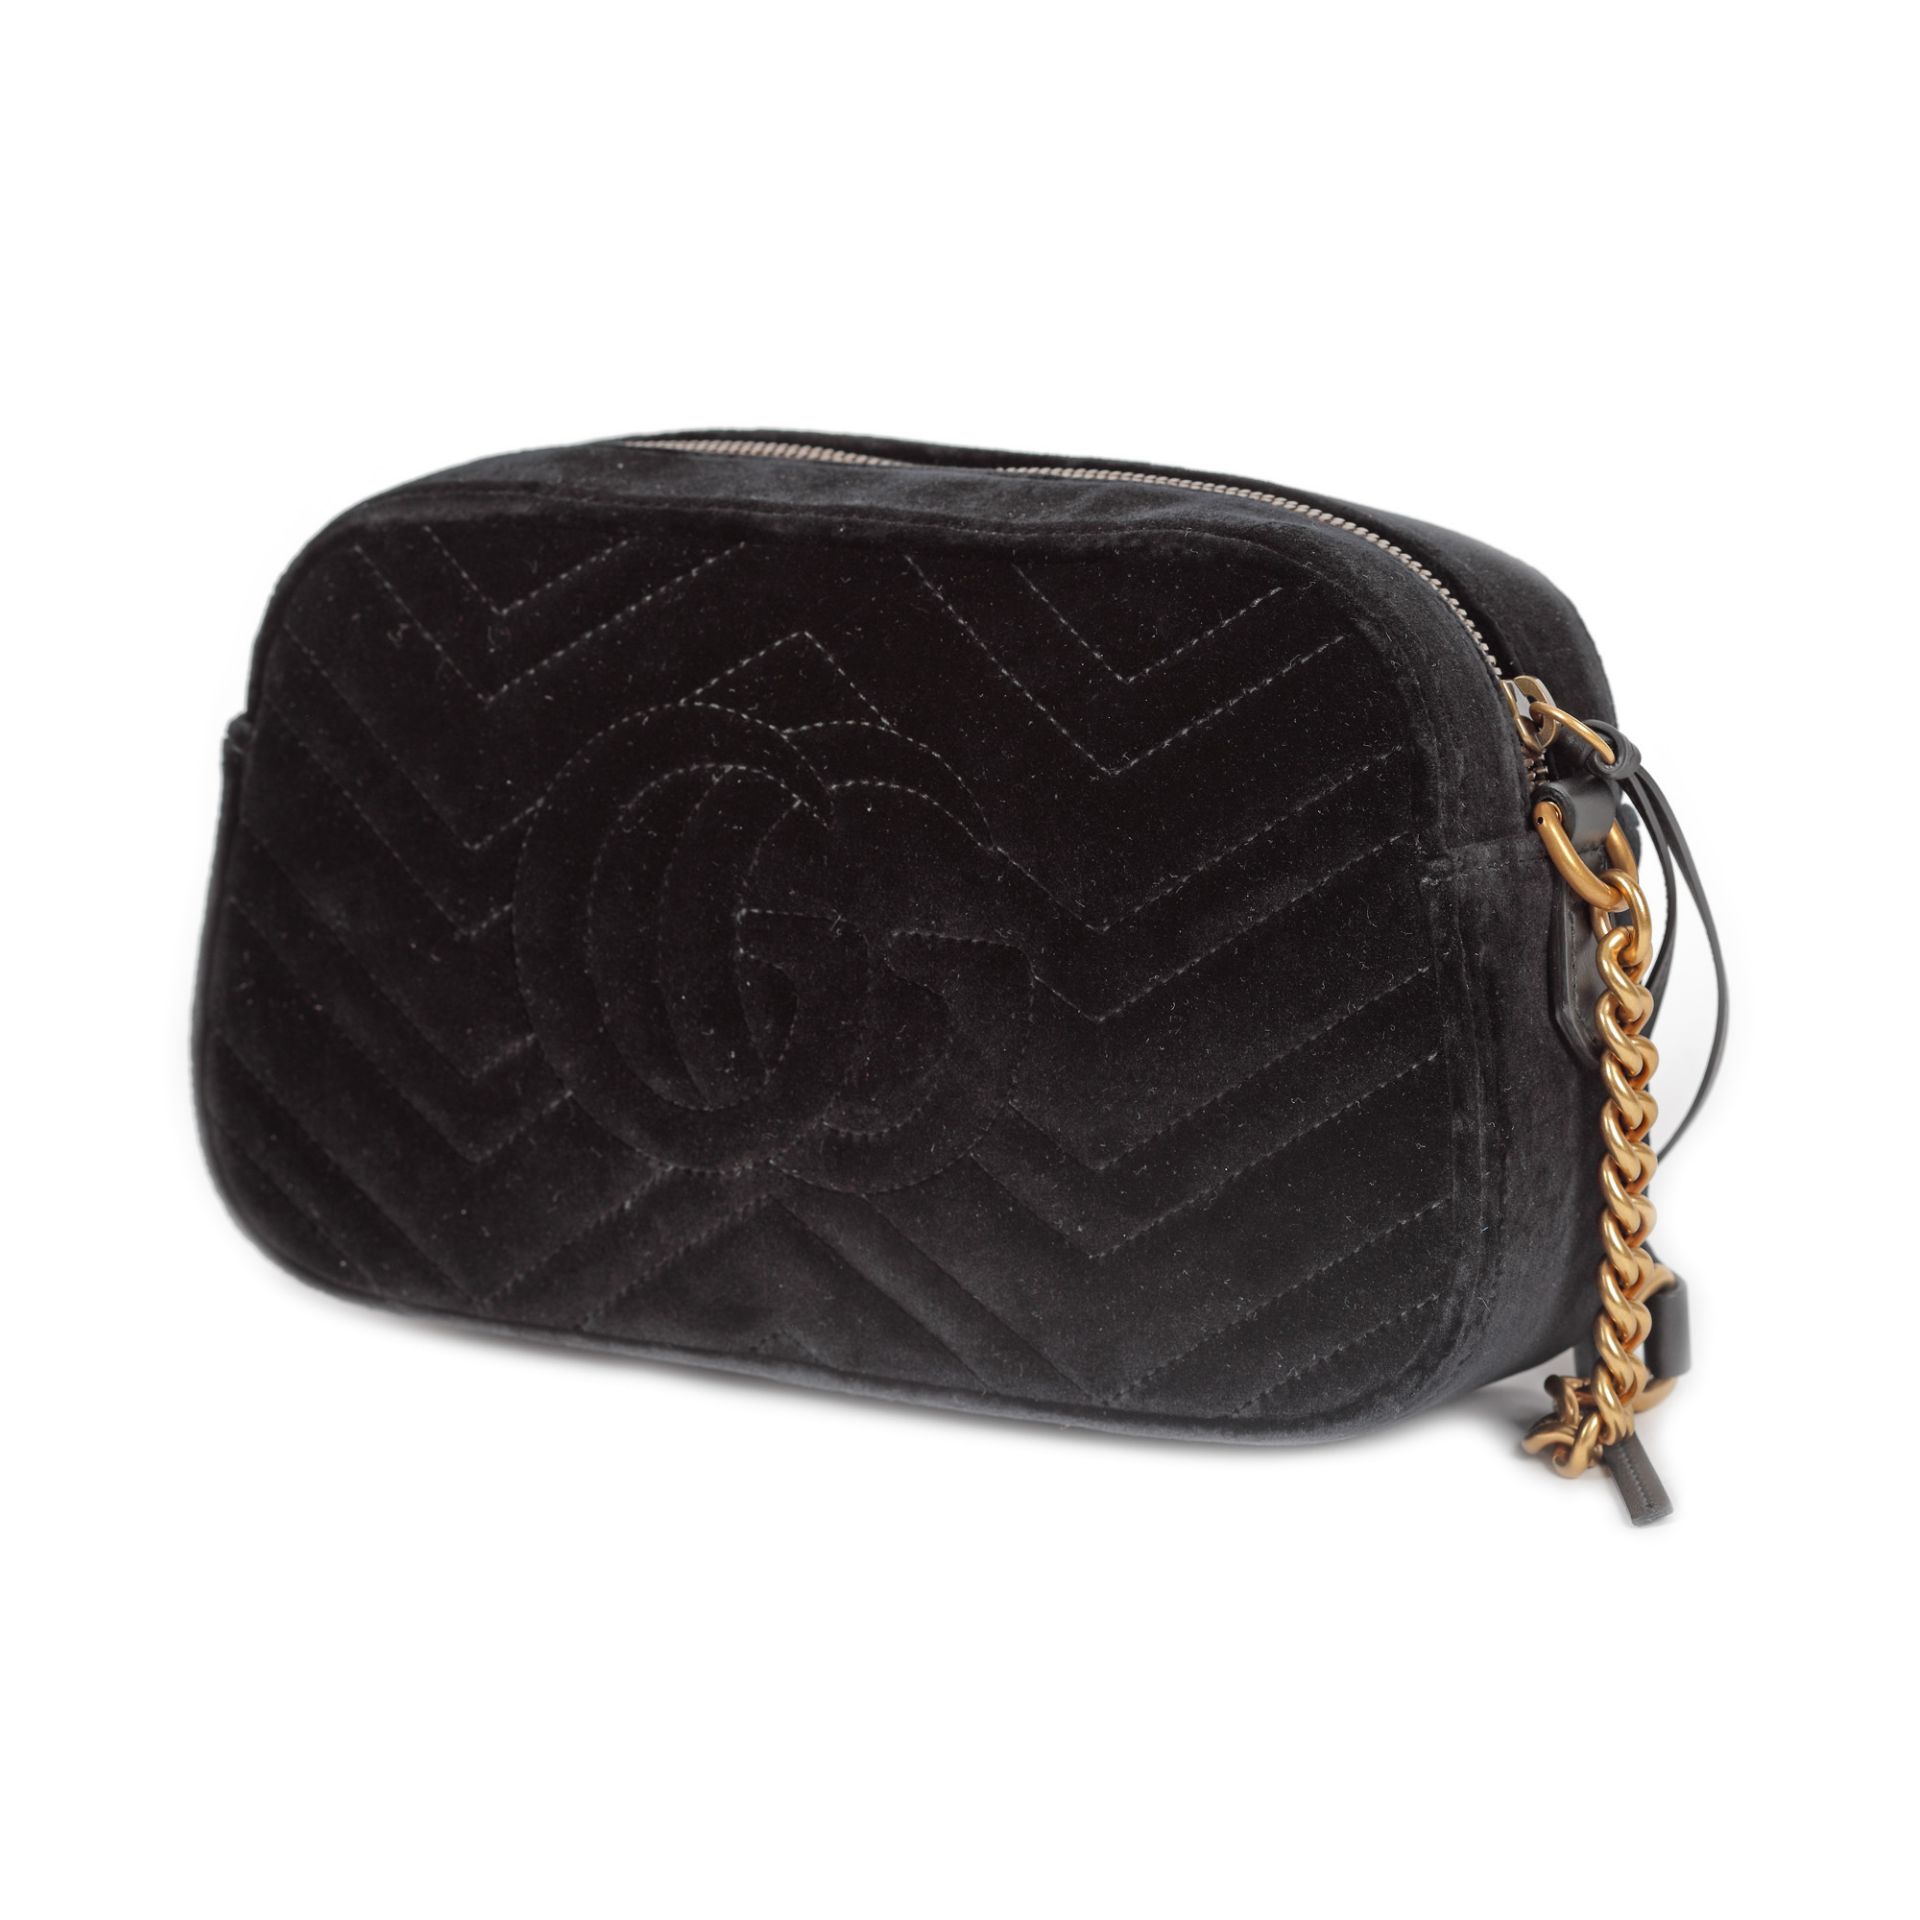 "Marmont Bambi" - Gucci bag, quilted velvet, black, embroidered elements - Image 4 of 4